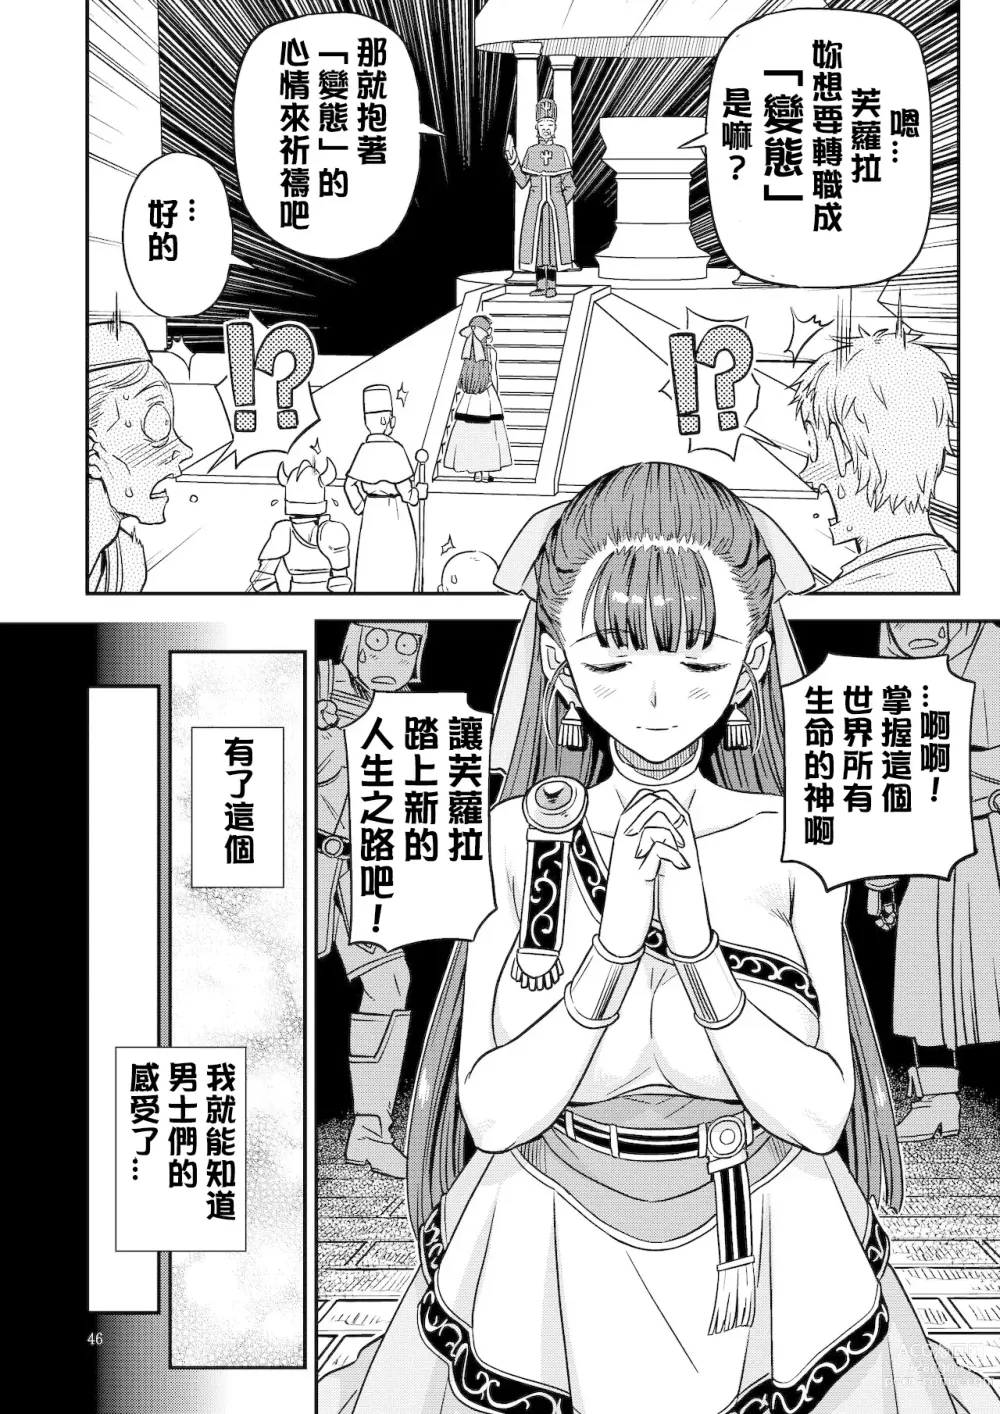 Page 3 of doujinshi Dragon Quest One Thousand and One Nights (Dragon Quest) [Digital]  【Chinese】【QTE中文翻譯】